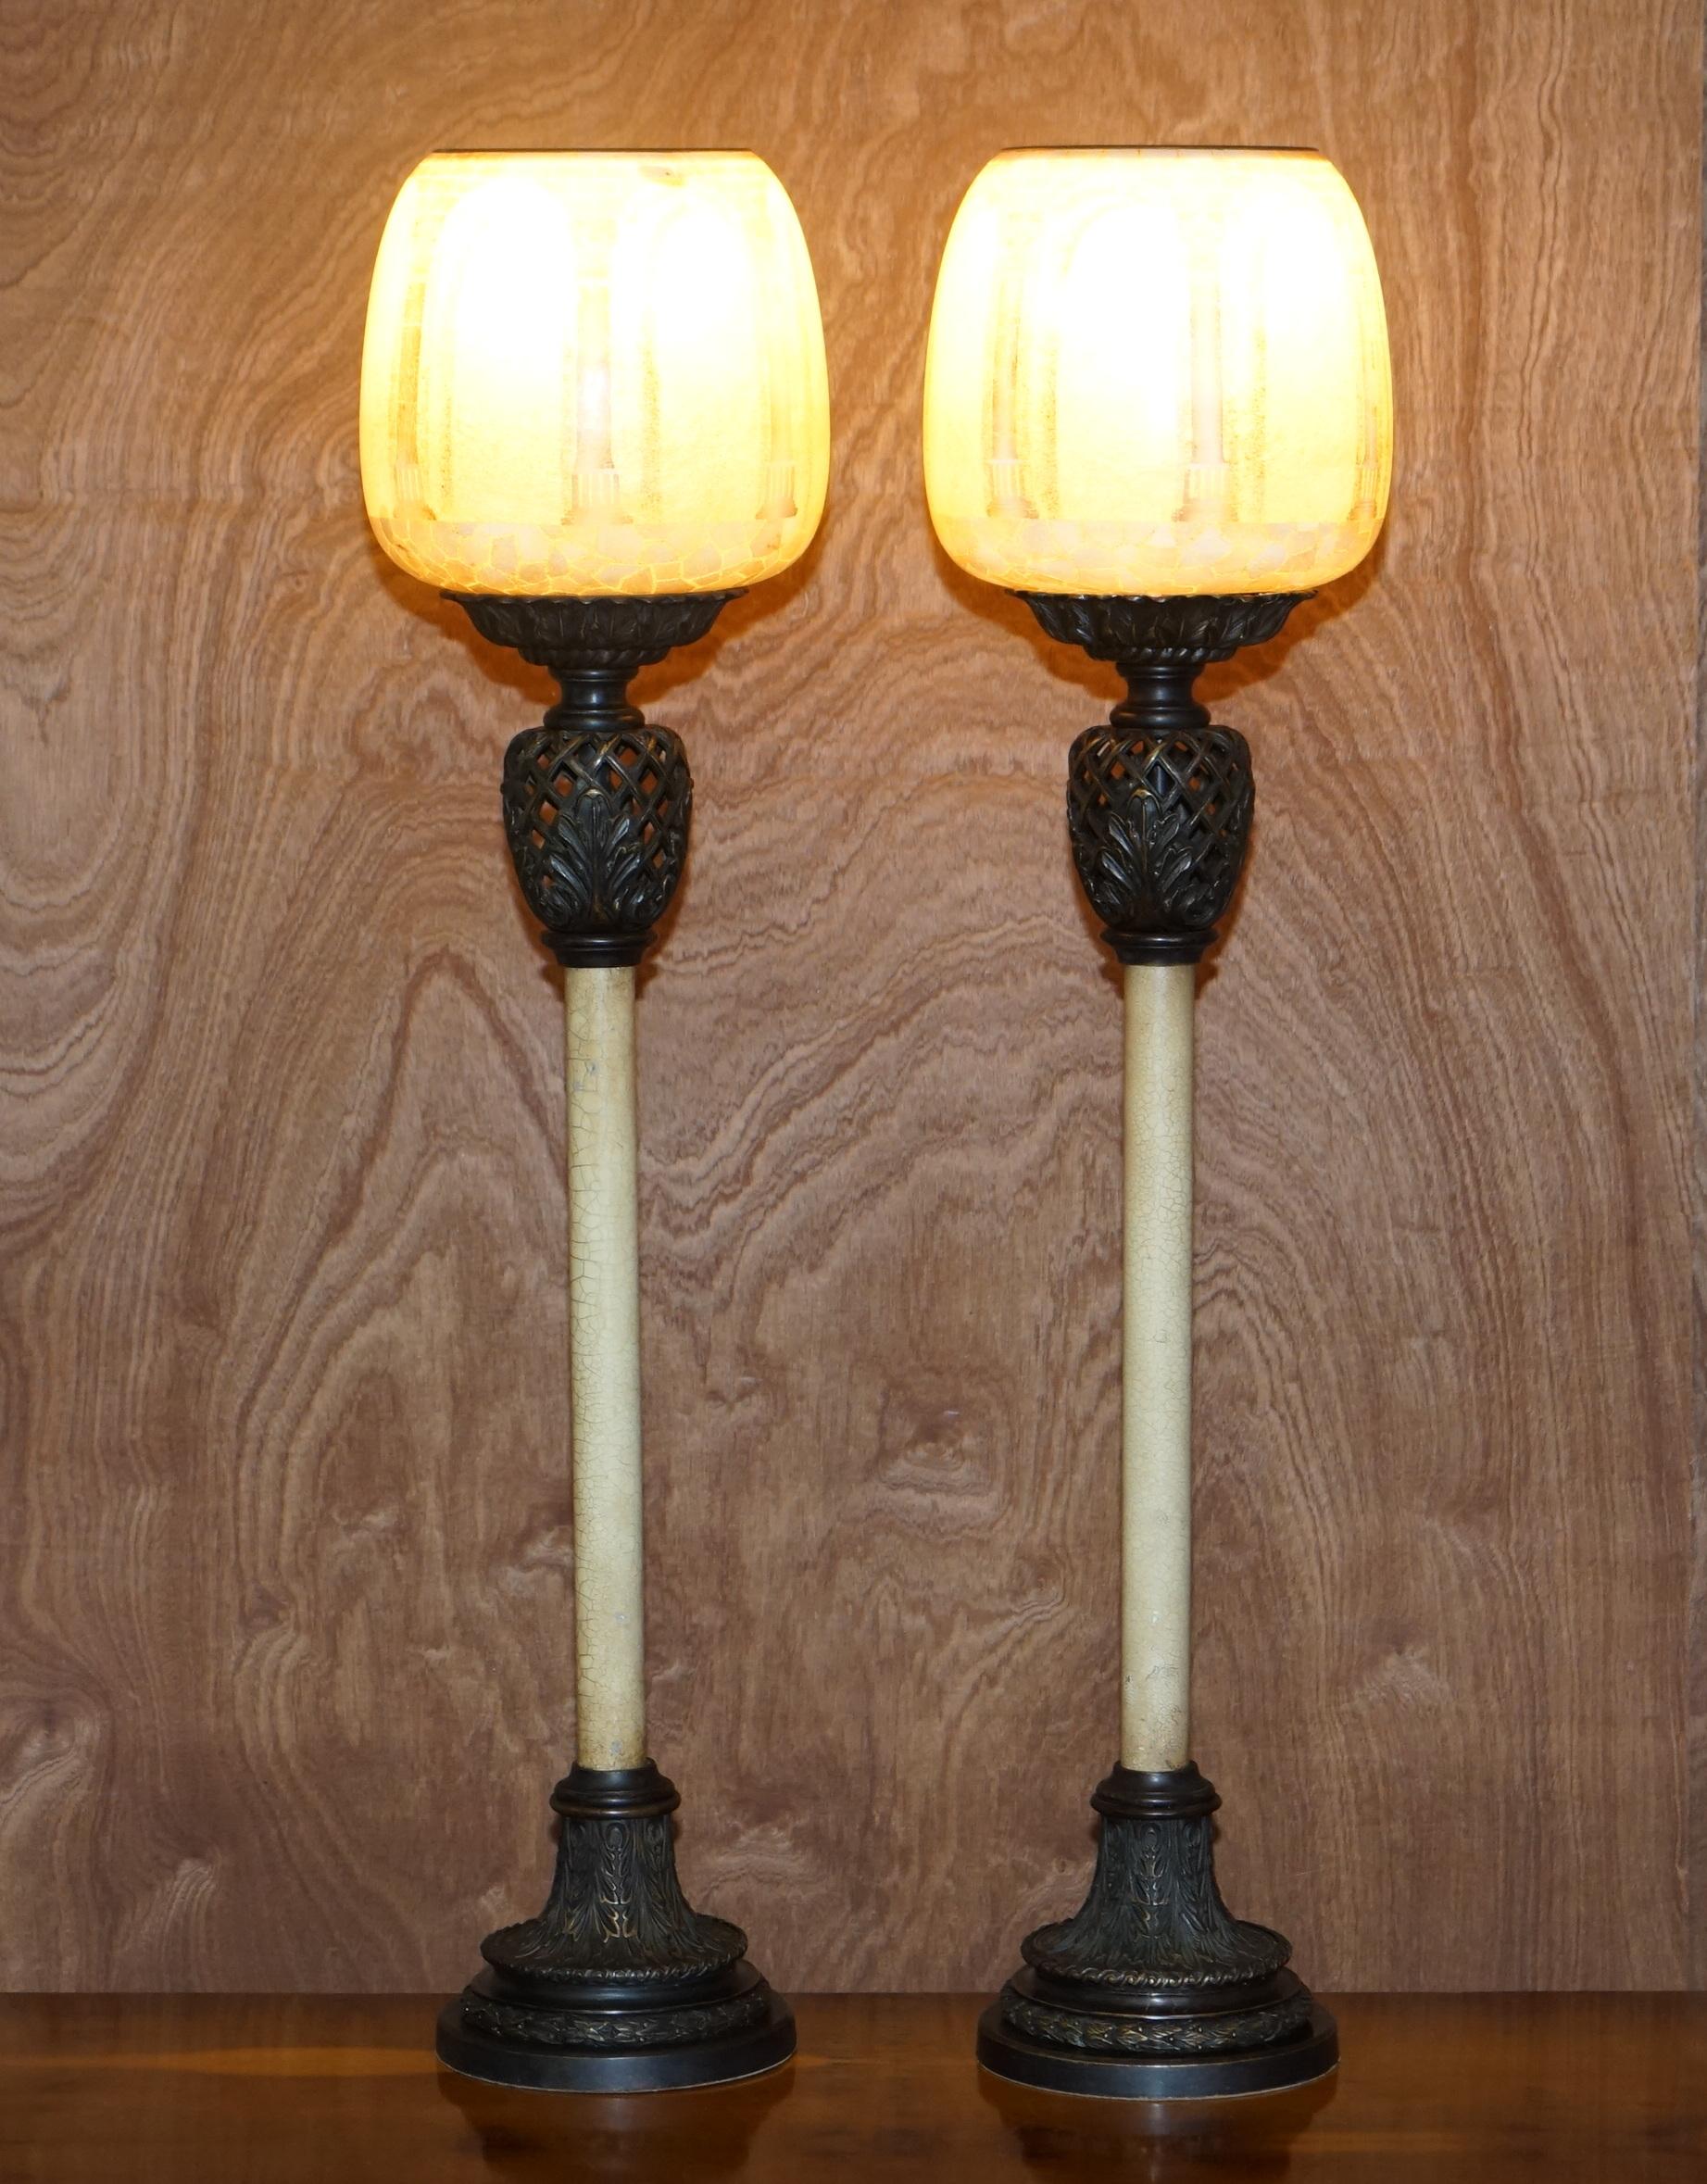 We are delighted to offer this stunning pair of very rare vintage tall table lamps with stunning Roman column shades

These are pretty much the most decorative lamps I have ever seen, the shades are a thing of beauty, they are translucent and